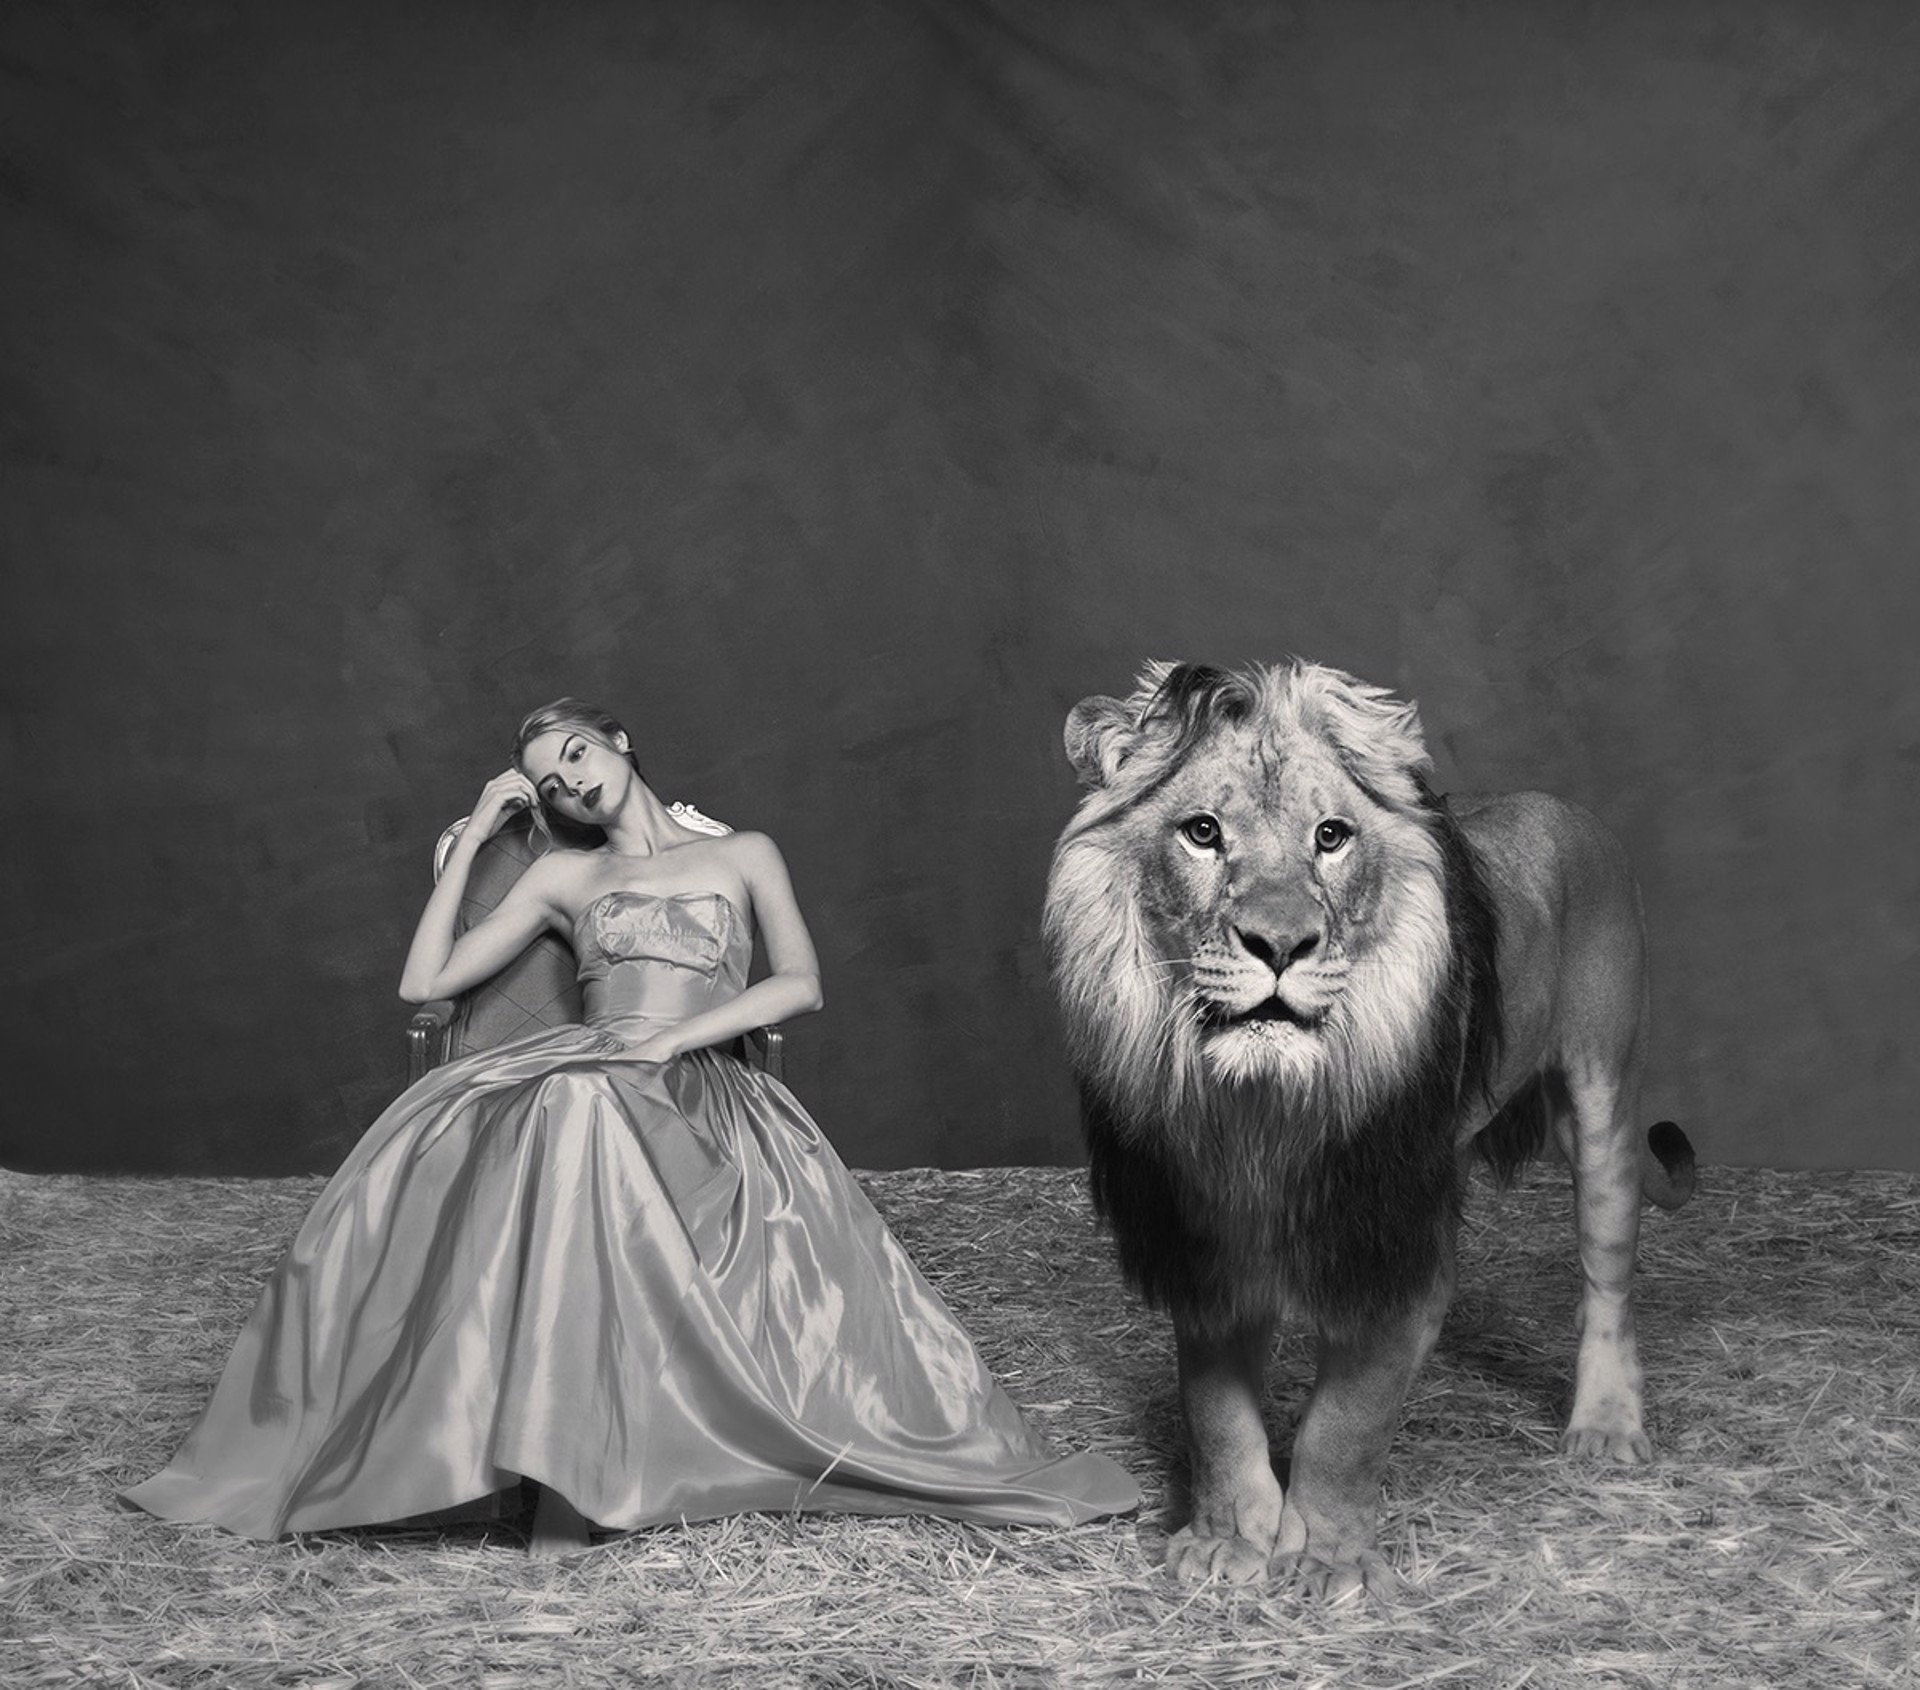 The Lady and The Lion by Tyler Shields